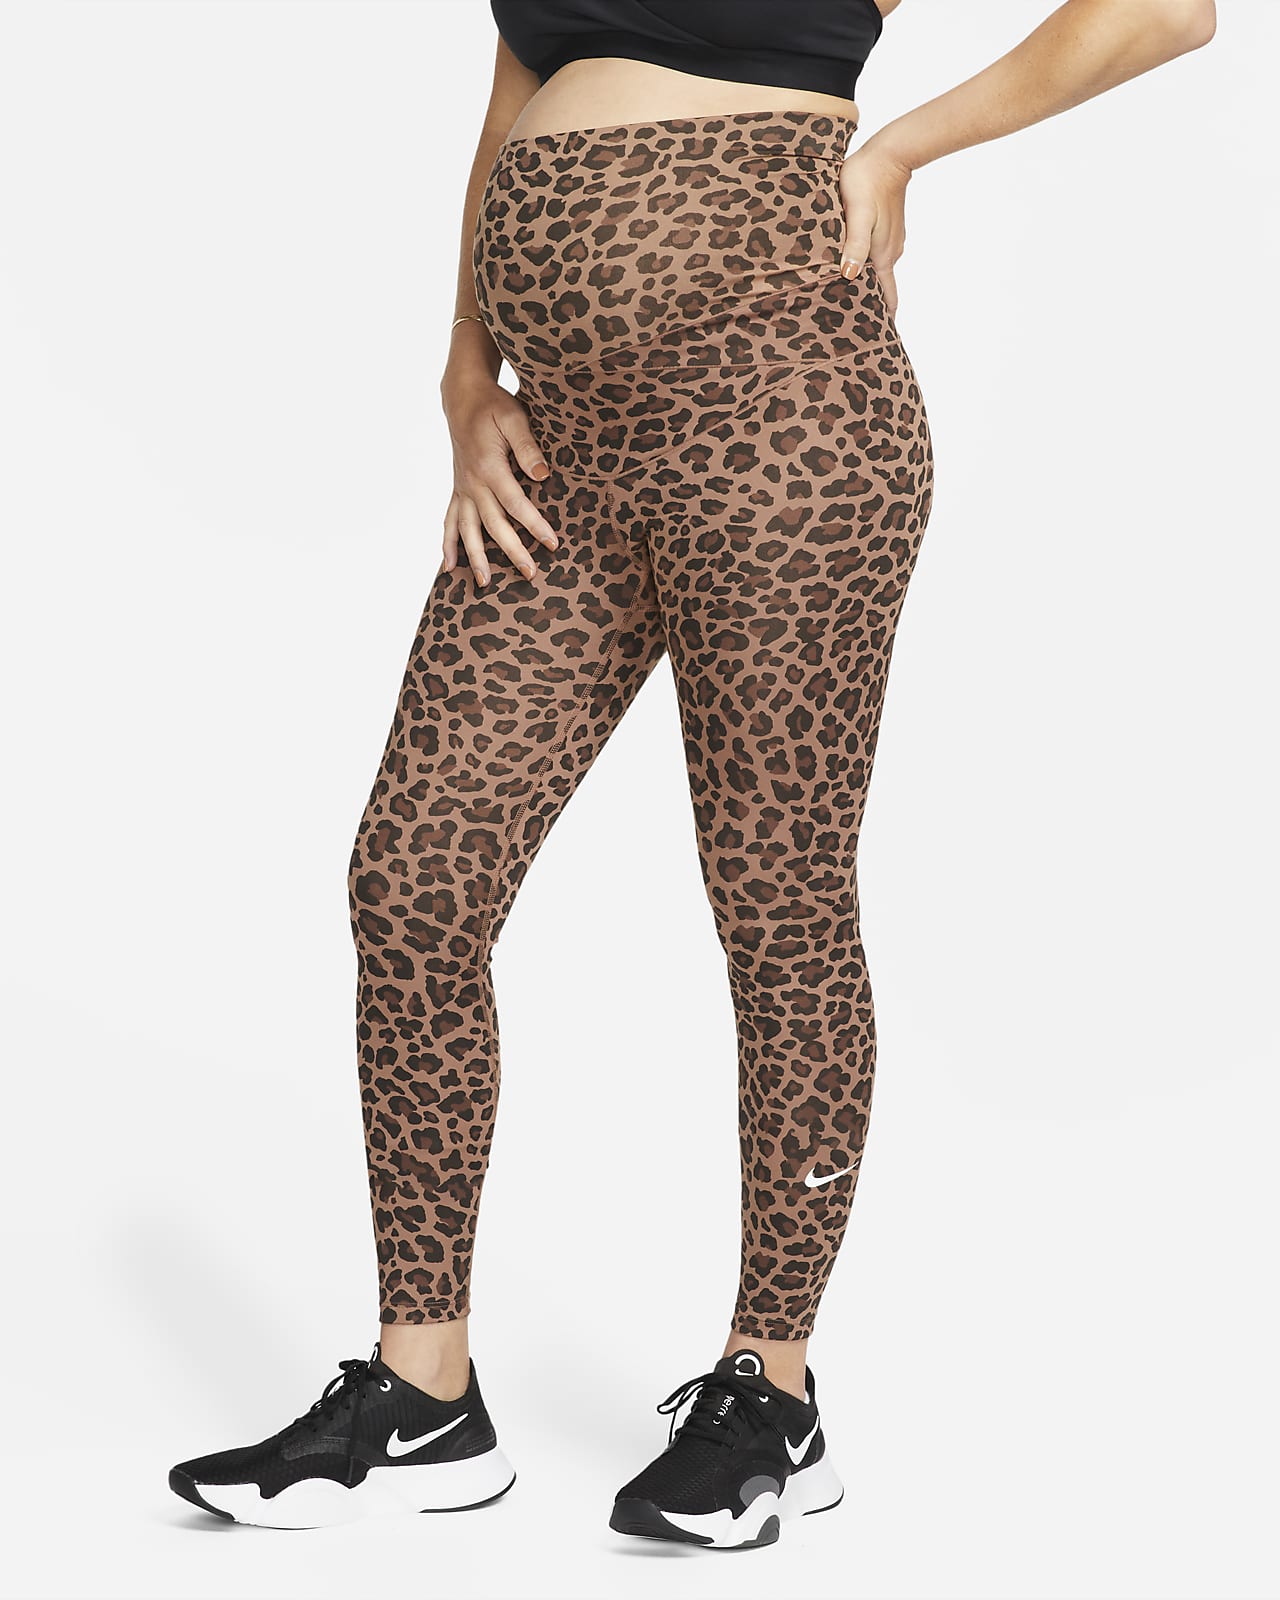 Womens Regular Fit Cotton Blend Lower for Women Tiger Animal Print   Regular Fit Cotton Blend